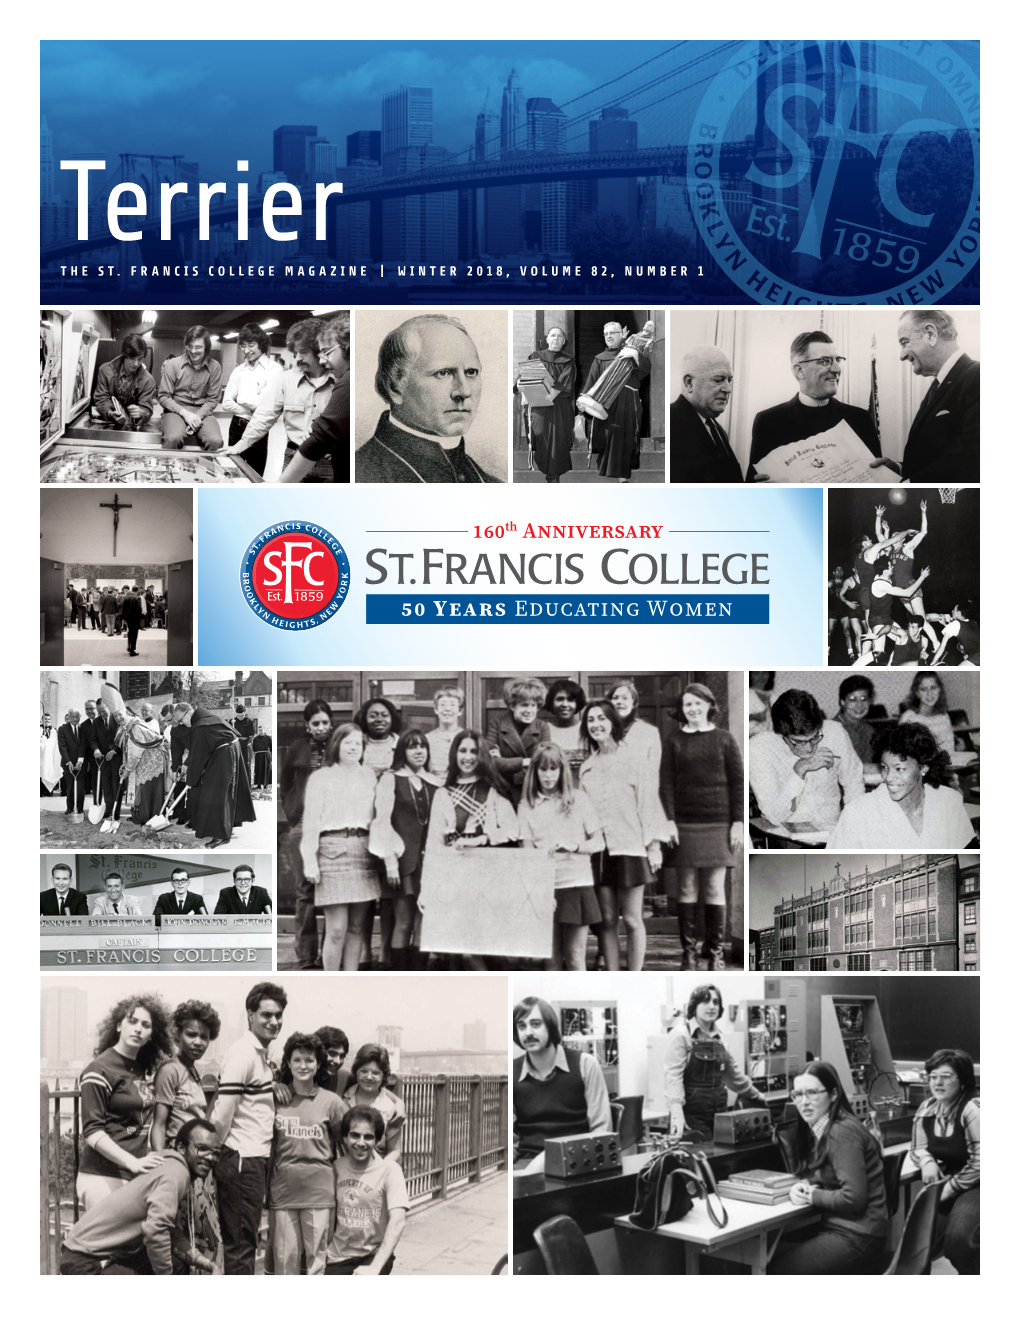 St. Francis College, Terrier, Winter 2018, Volume 82, Number 1 + 2017